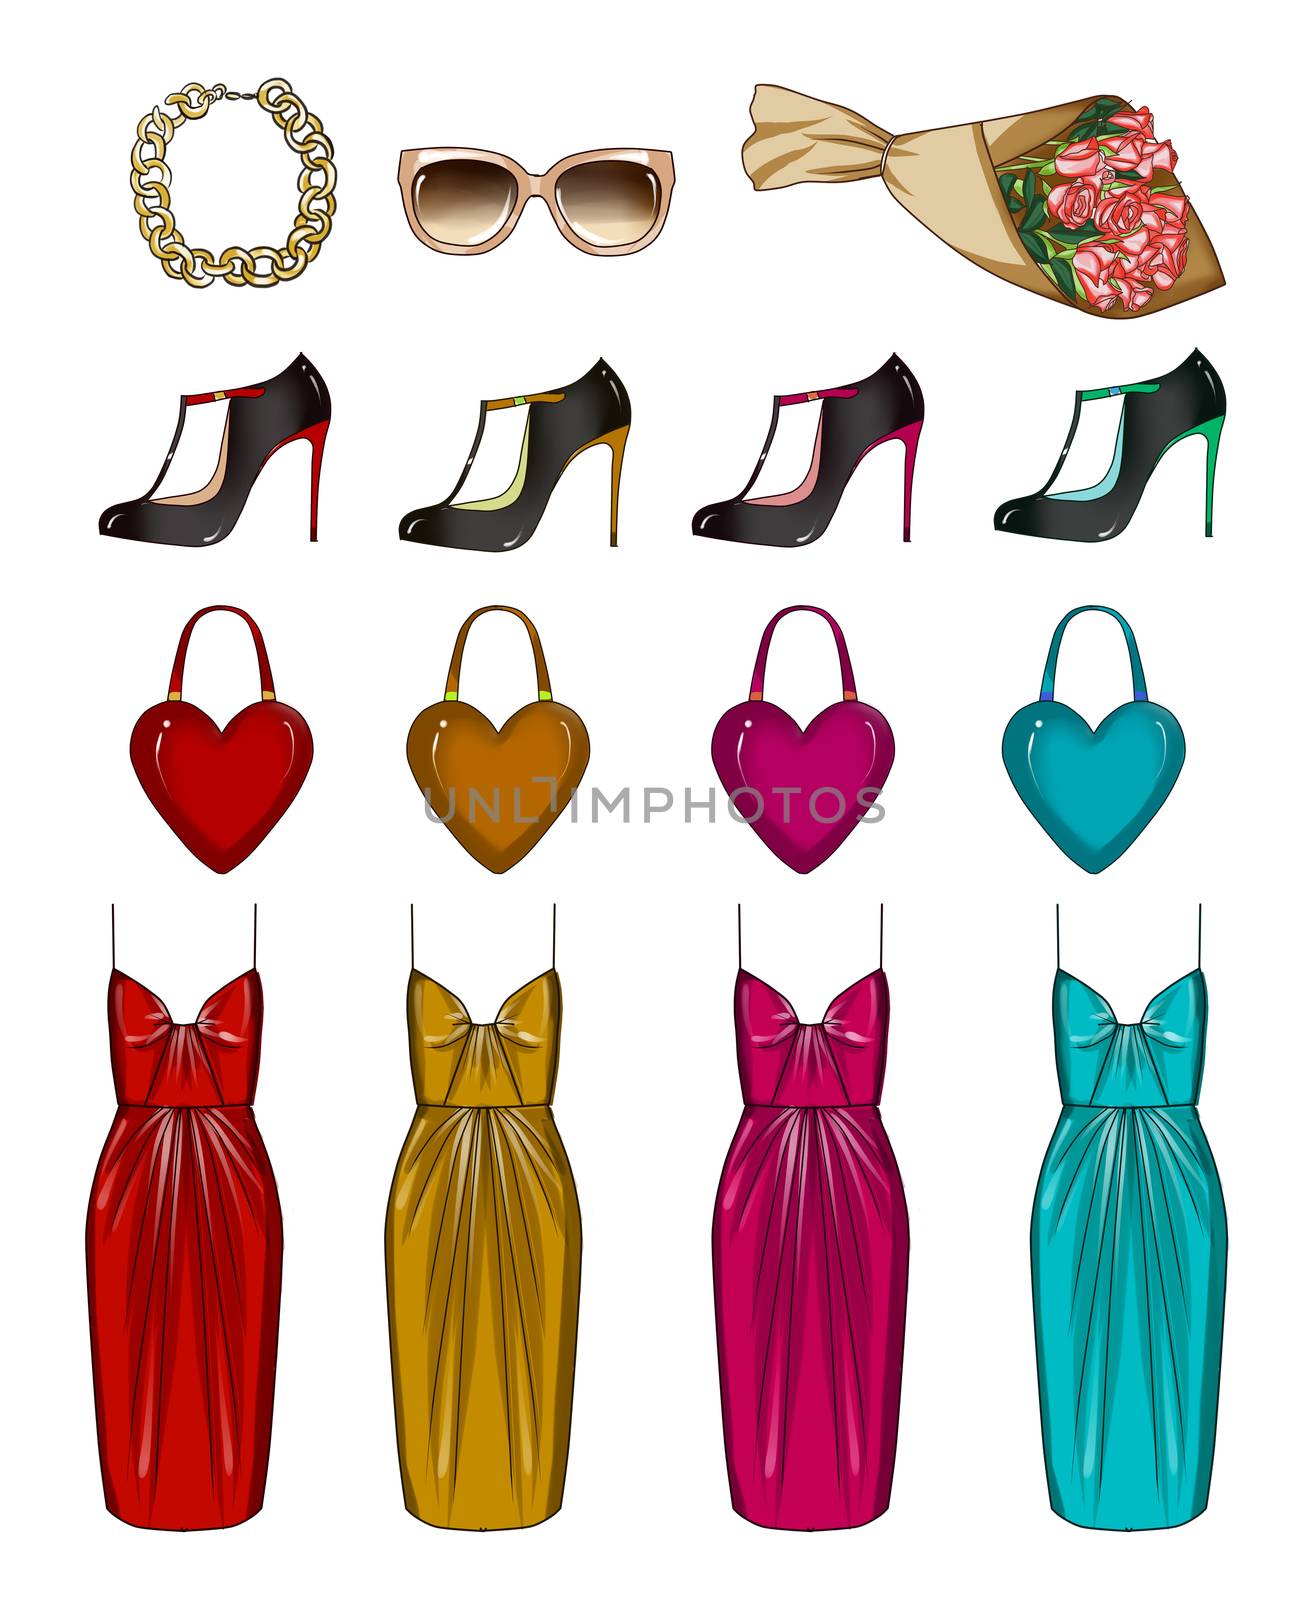 Fashion Collection of Clip Art - Fashionable and Trendy clothes and accessories by GGillustrations